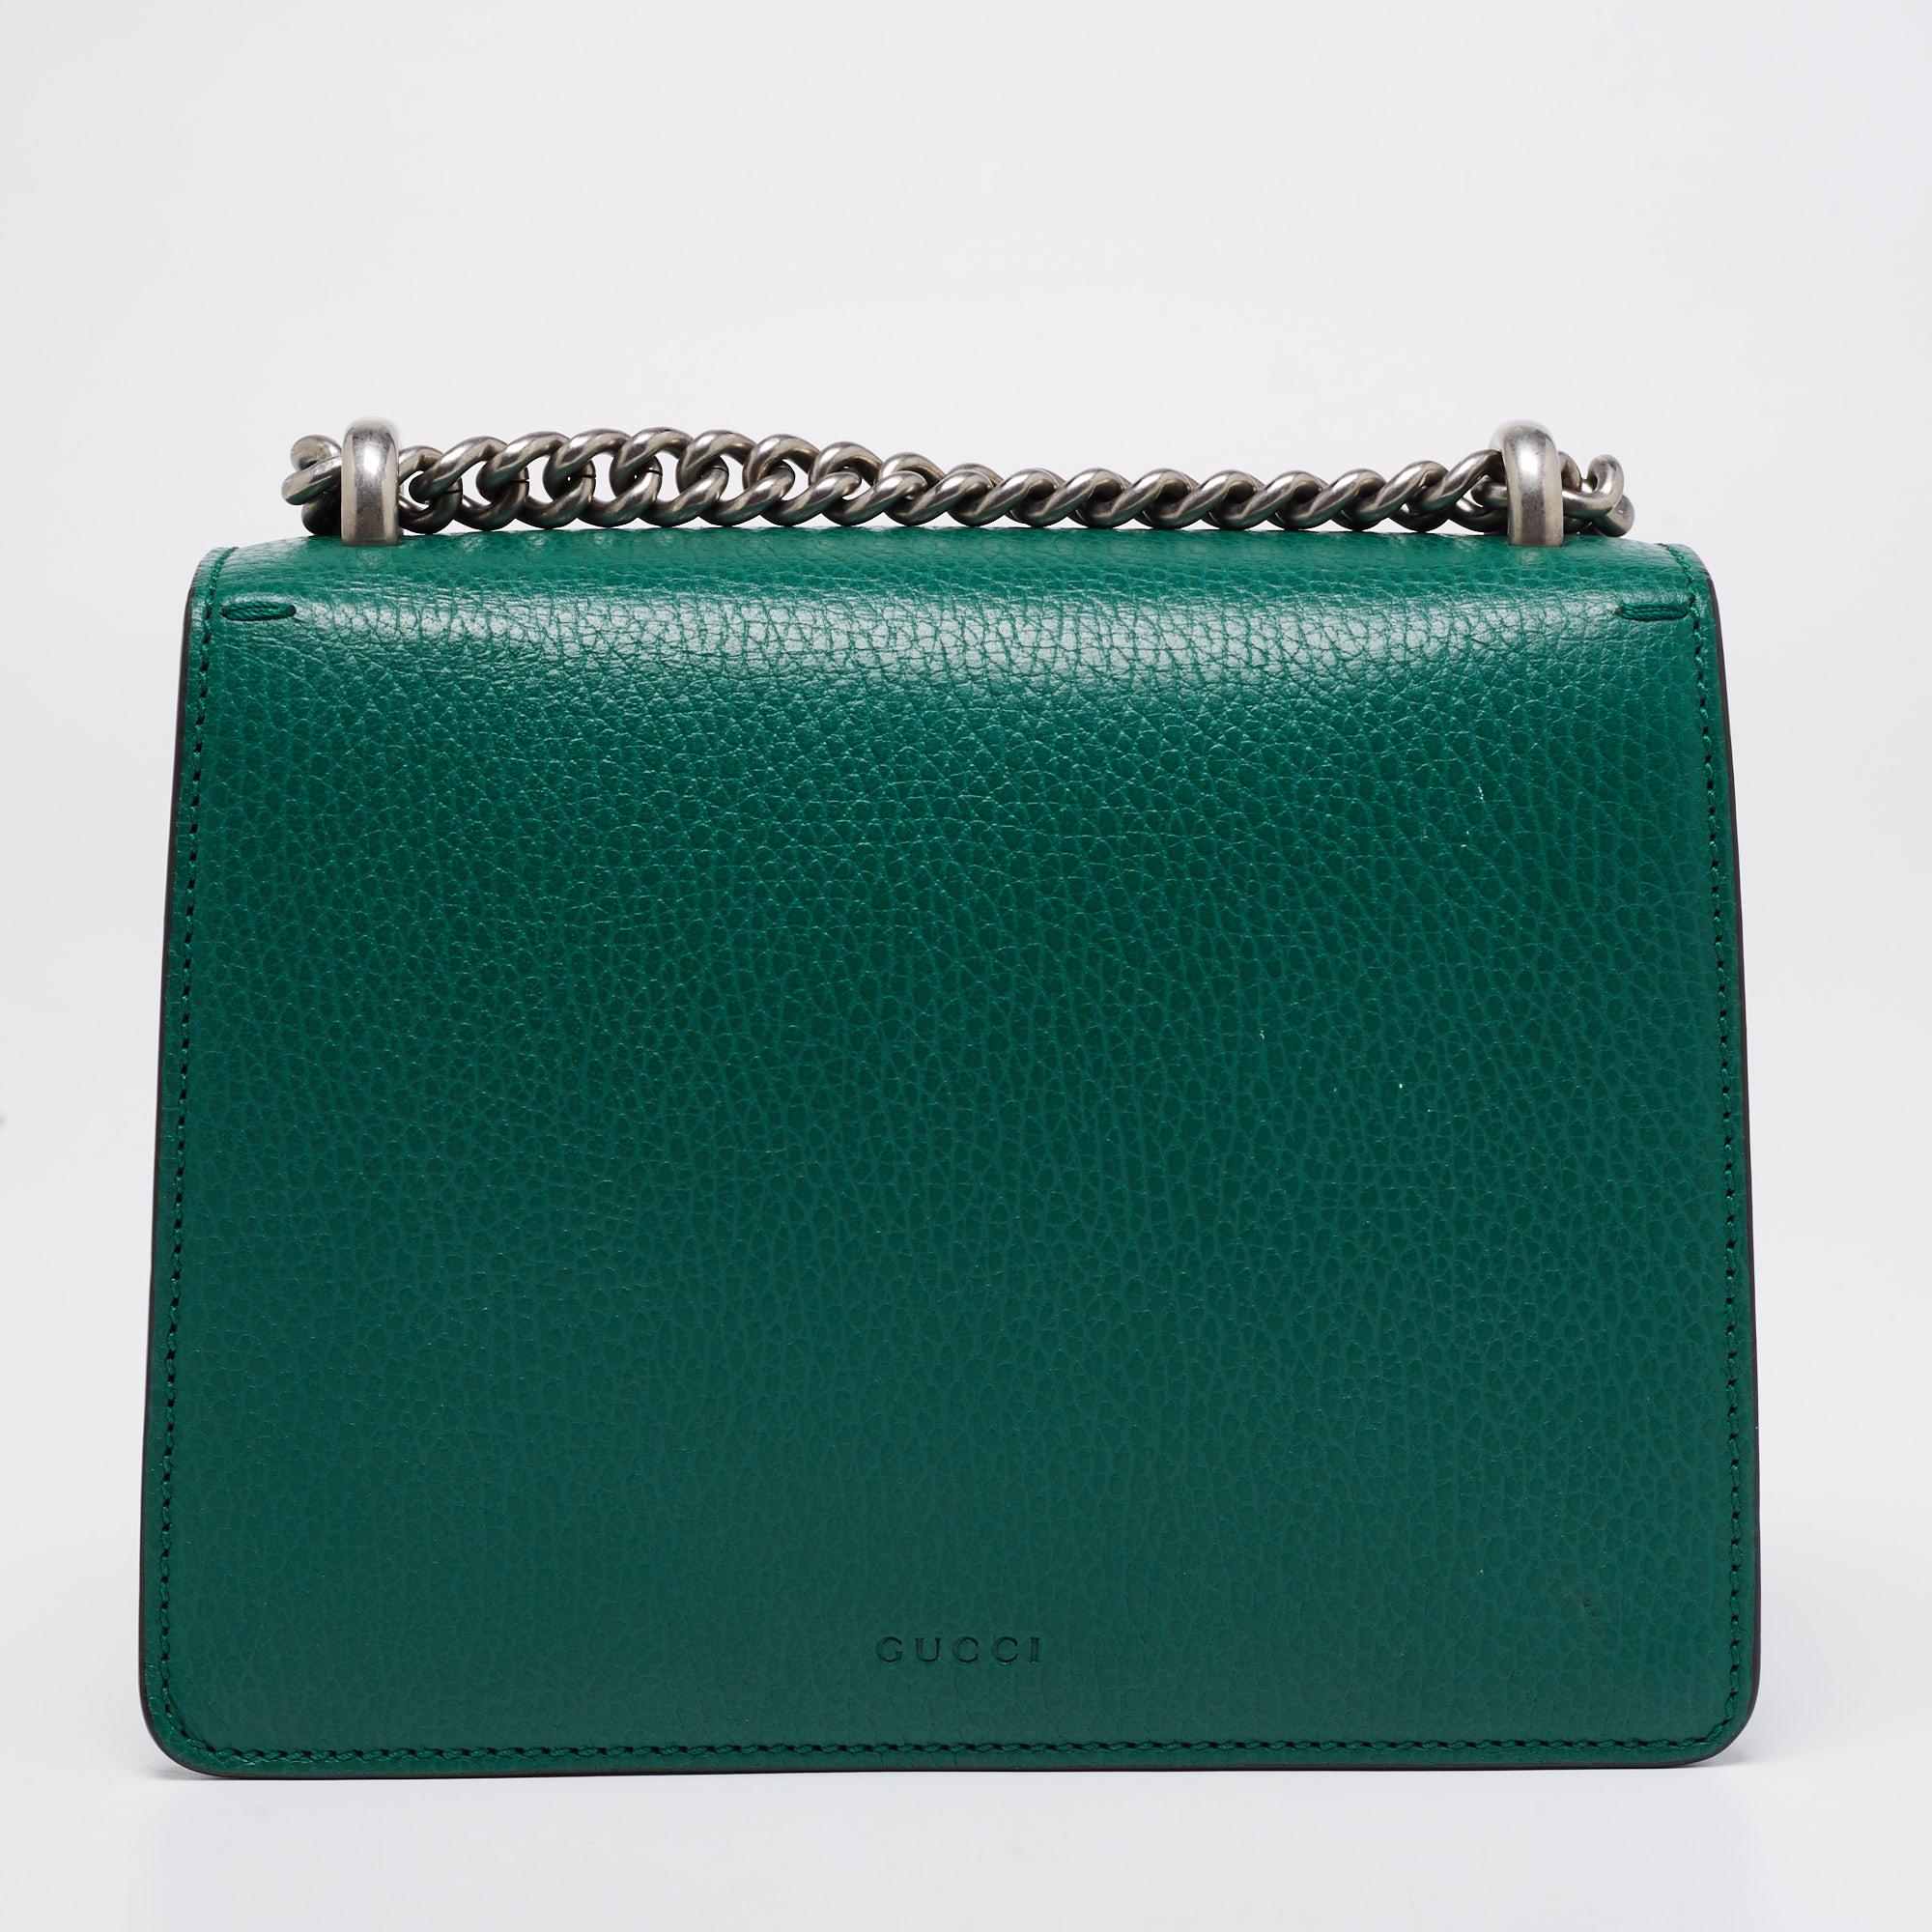 This Gucci Mini Dionysus bag has been beautifully crafted using green leather. The flap carries tiger heads with reference to the Greek god, Dionysus, and it secures a lined interior sized to dutifully hold your essentials. The artistic bag is